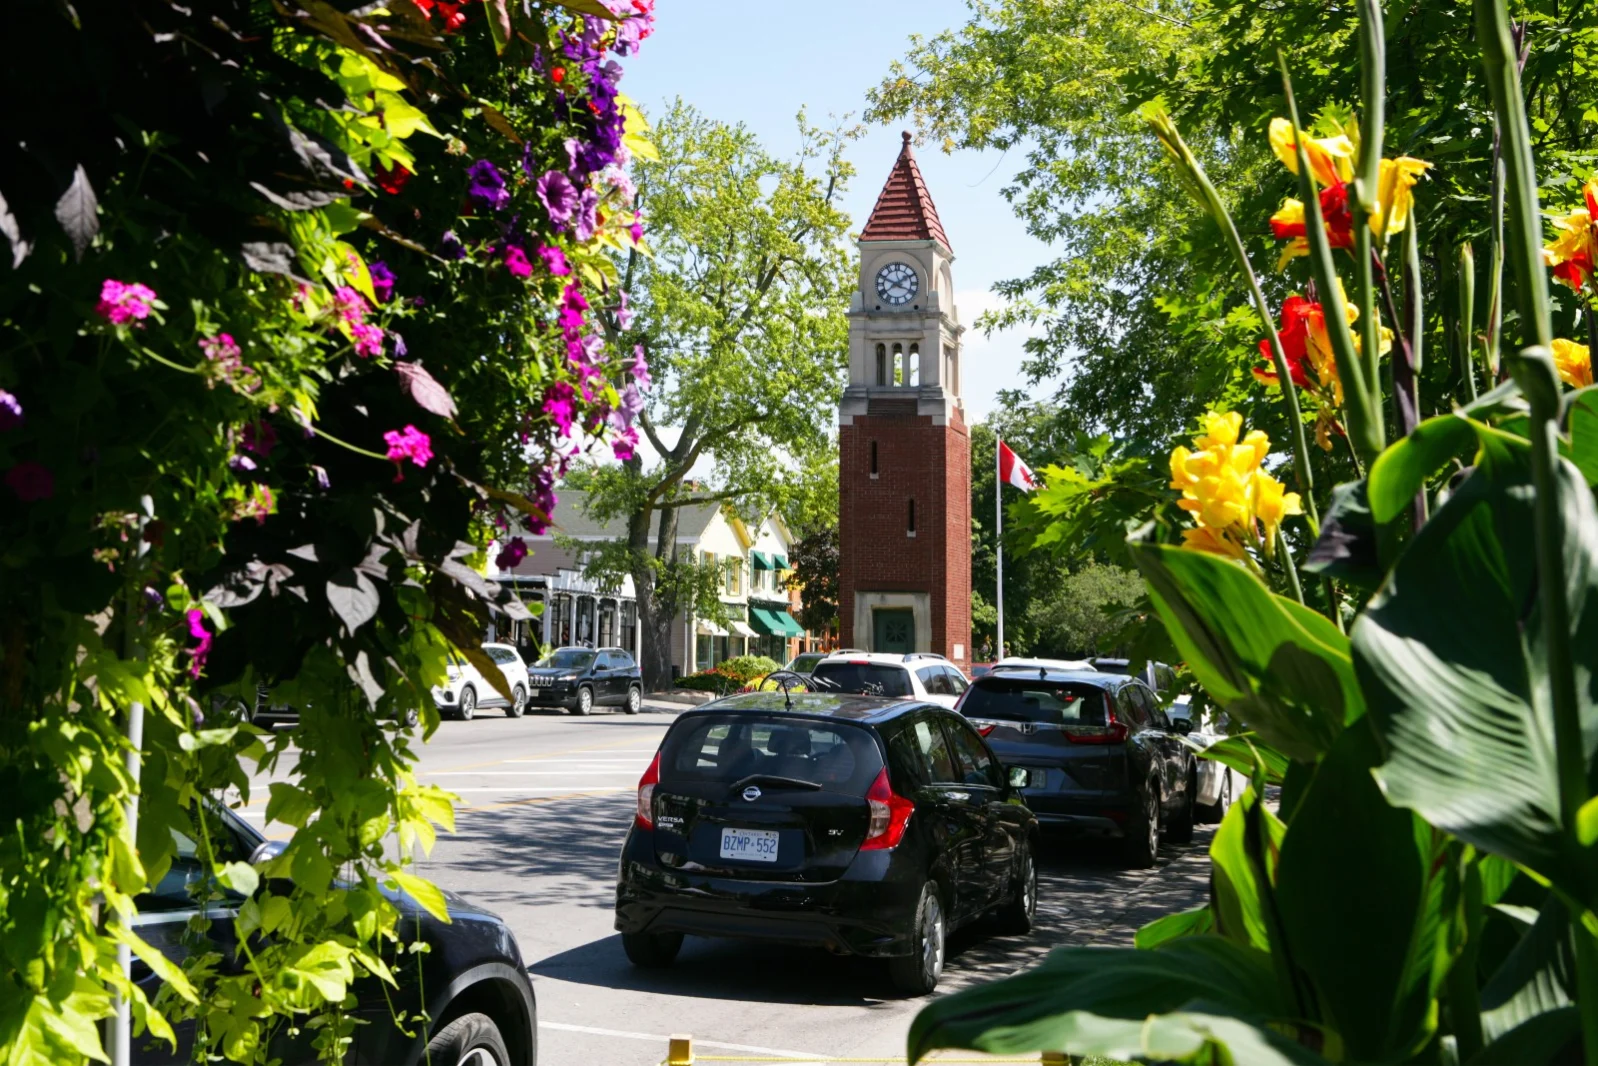 A clock tower in Old Town Niagara-on-the-Lake, a popular destination in Canada